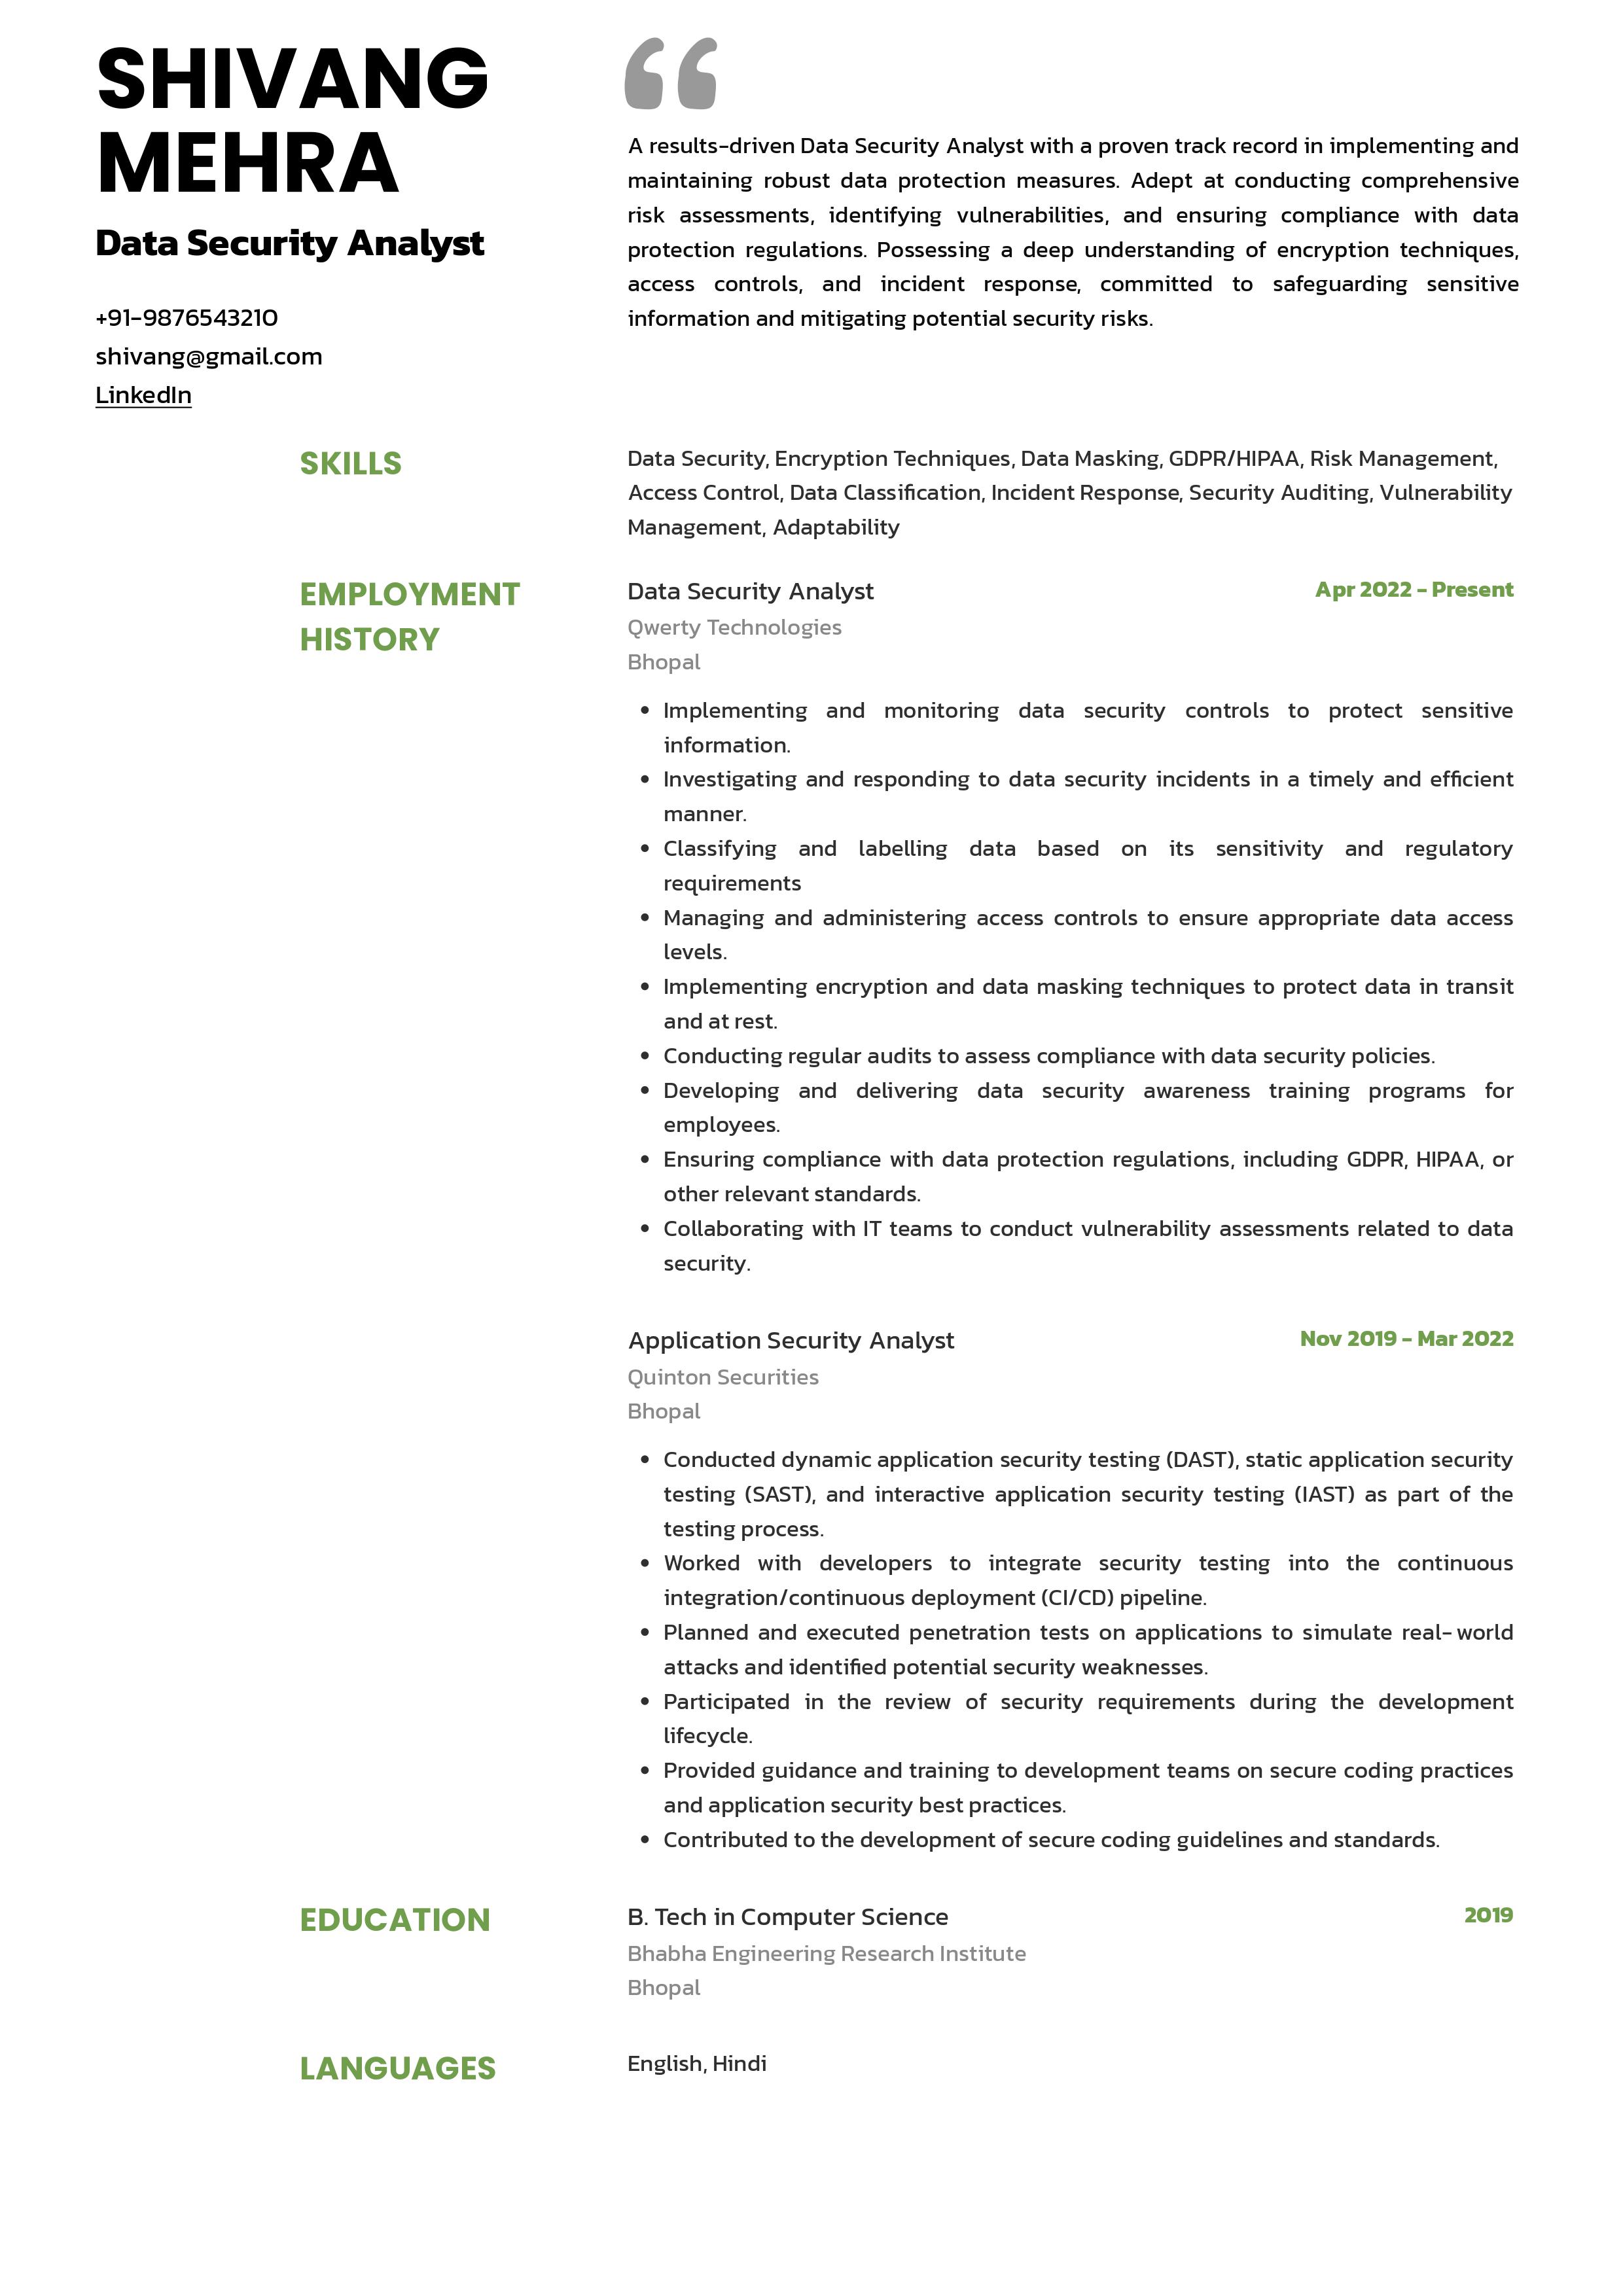 Sample Resume of  Data Security Analyst | Free Resume Templates & Samples on Resumod.co